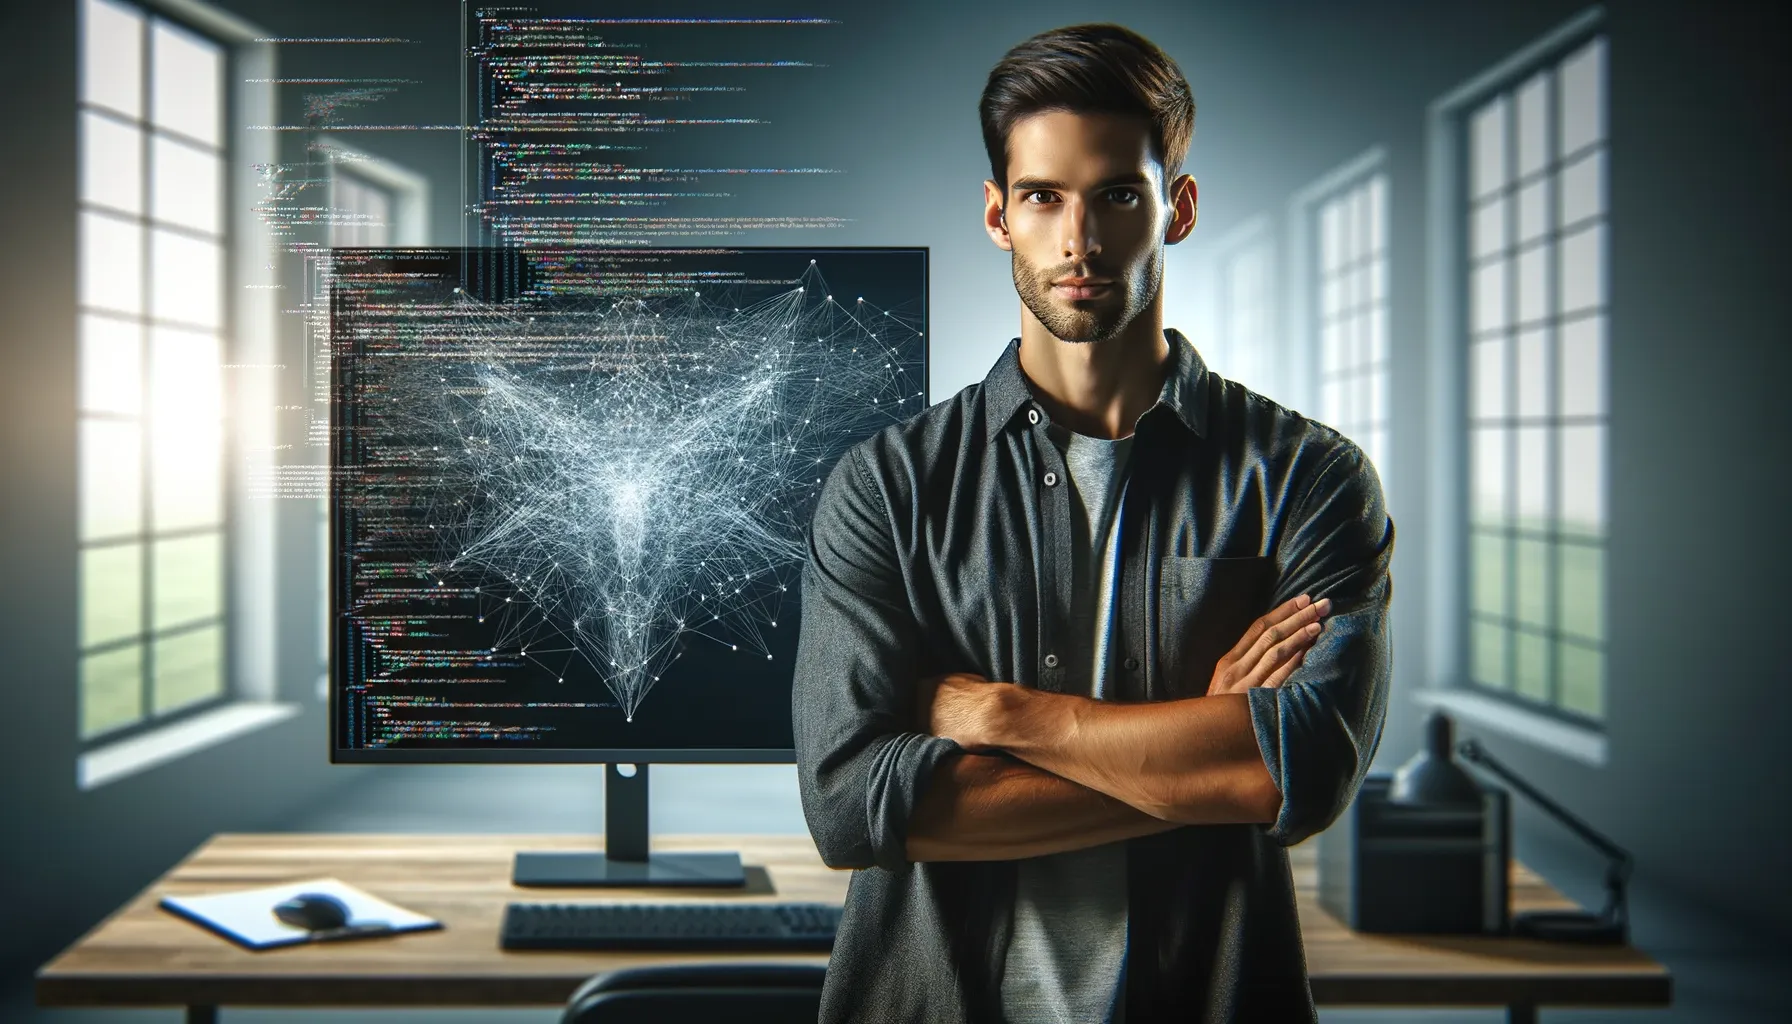 A confident software developer standing with crossed arms in front of a monitor displaying intricate code and data visualizations.